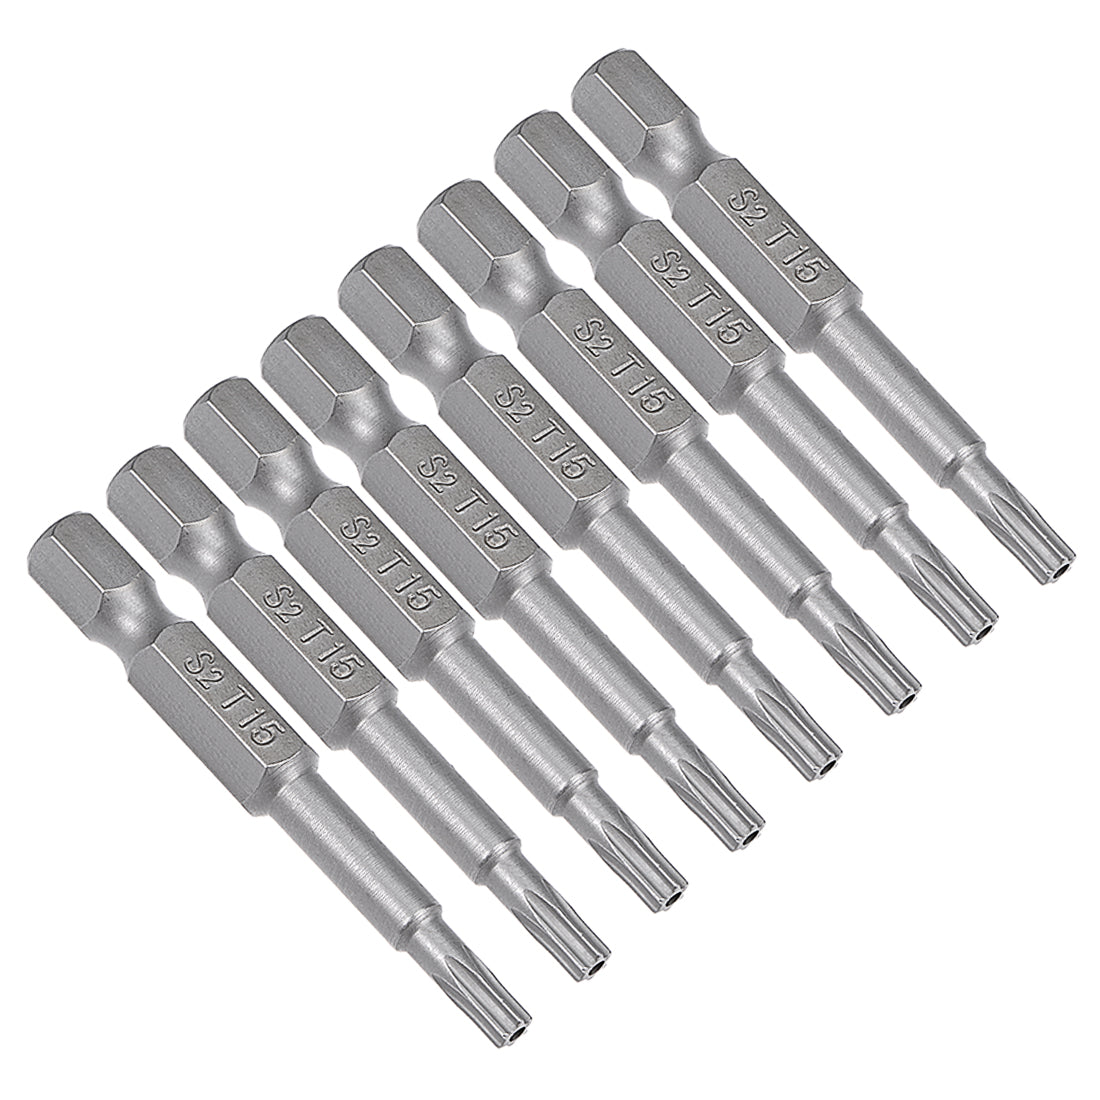 uxcell Uxcell 8 Pcs 1/4" Hex Shank T15 Magnetic Security Torx Screwdriver Bits 50mm Length